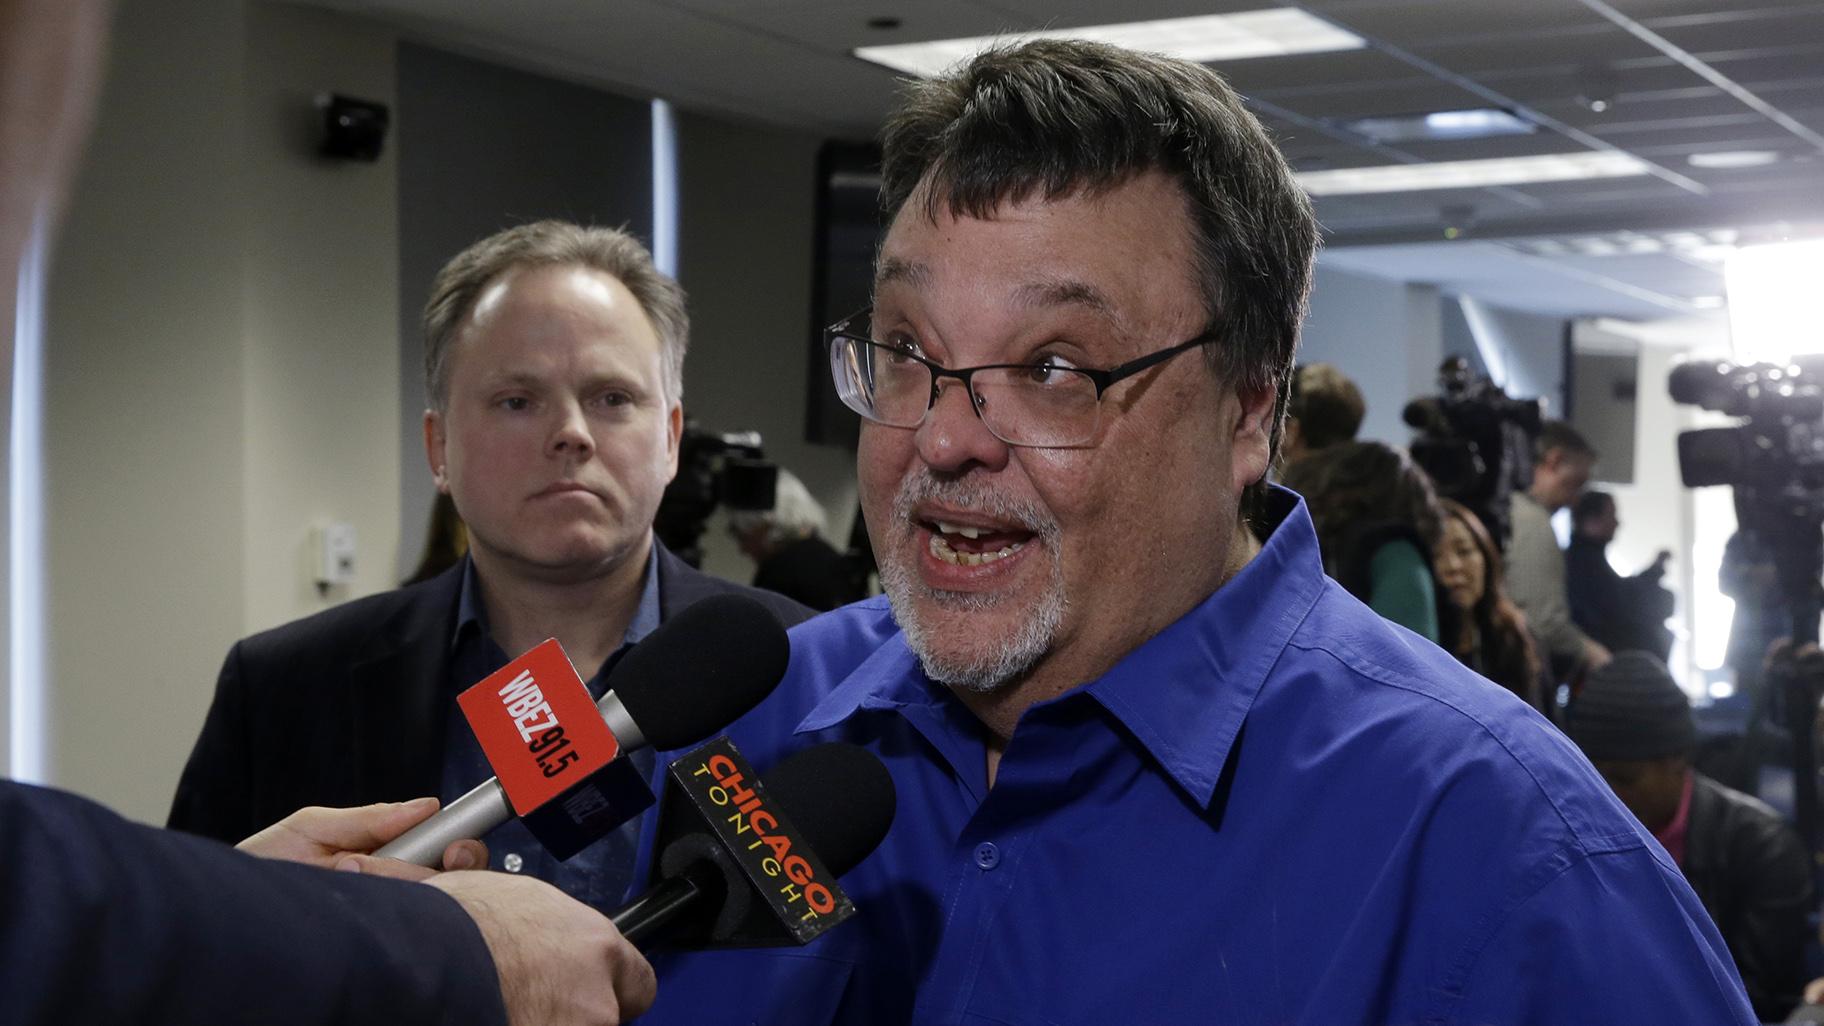 Former Chicago Sun-Times reporter Jim DeRogatis talks to Chicago Tonight and other reporters after a news conference by Cook County State’s Attorney Kim Foxx announcing charges against R. Kelly, the R&B star, with 10 counts of aggravated sexual abuse involving multiple victims in Chicago. (AP Photo / Kiichiro Sato)